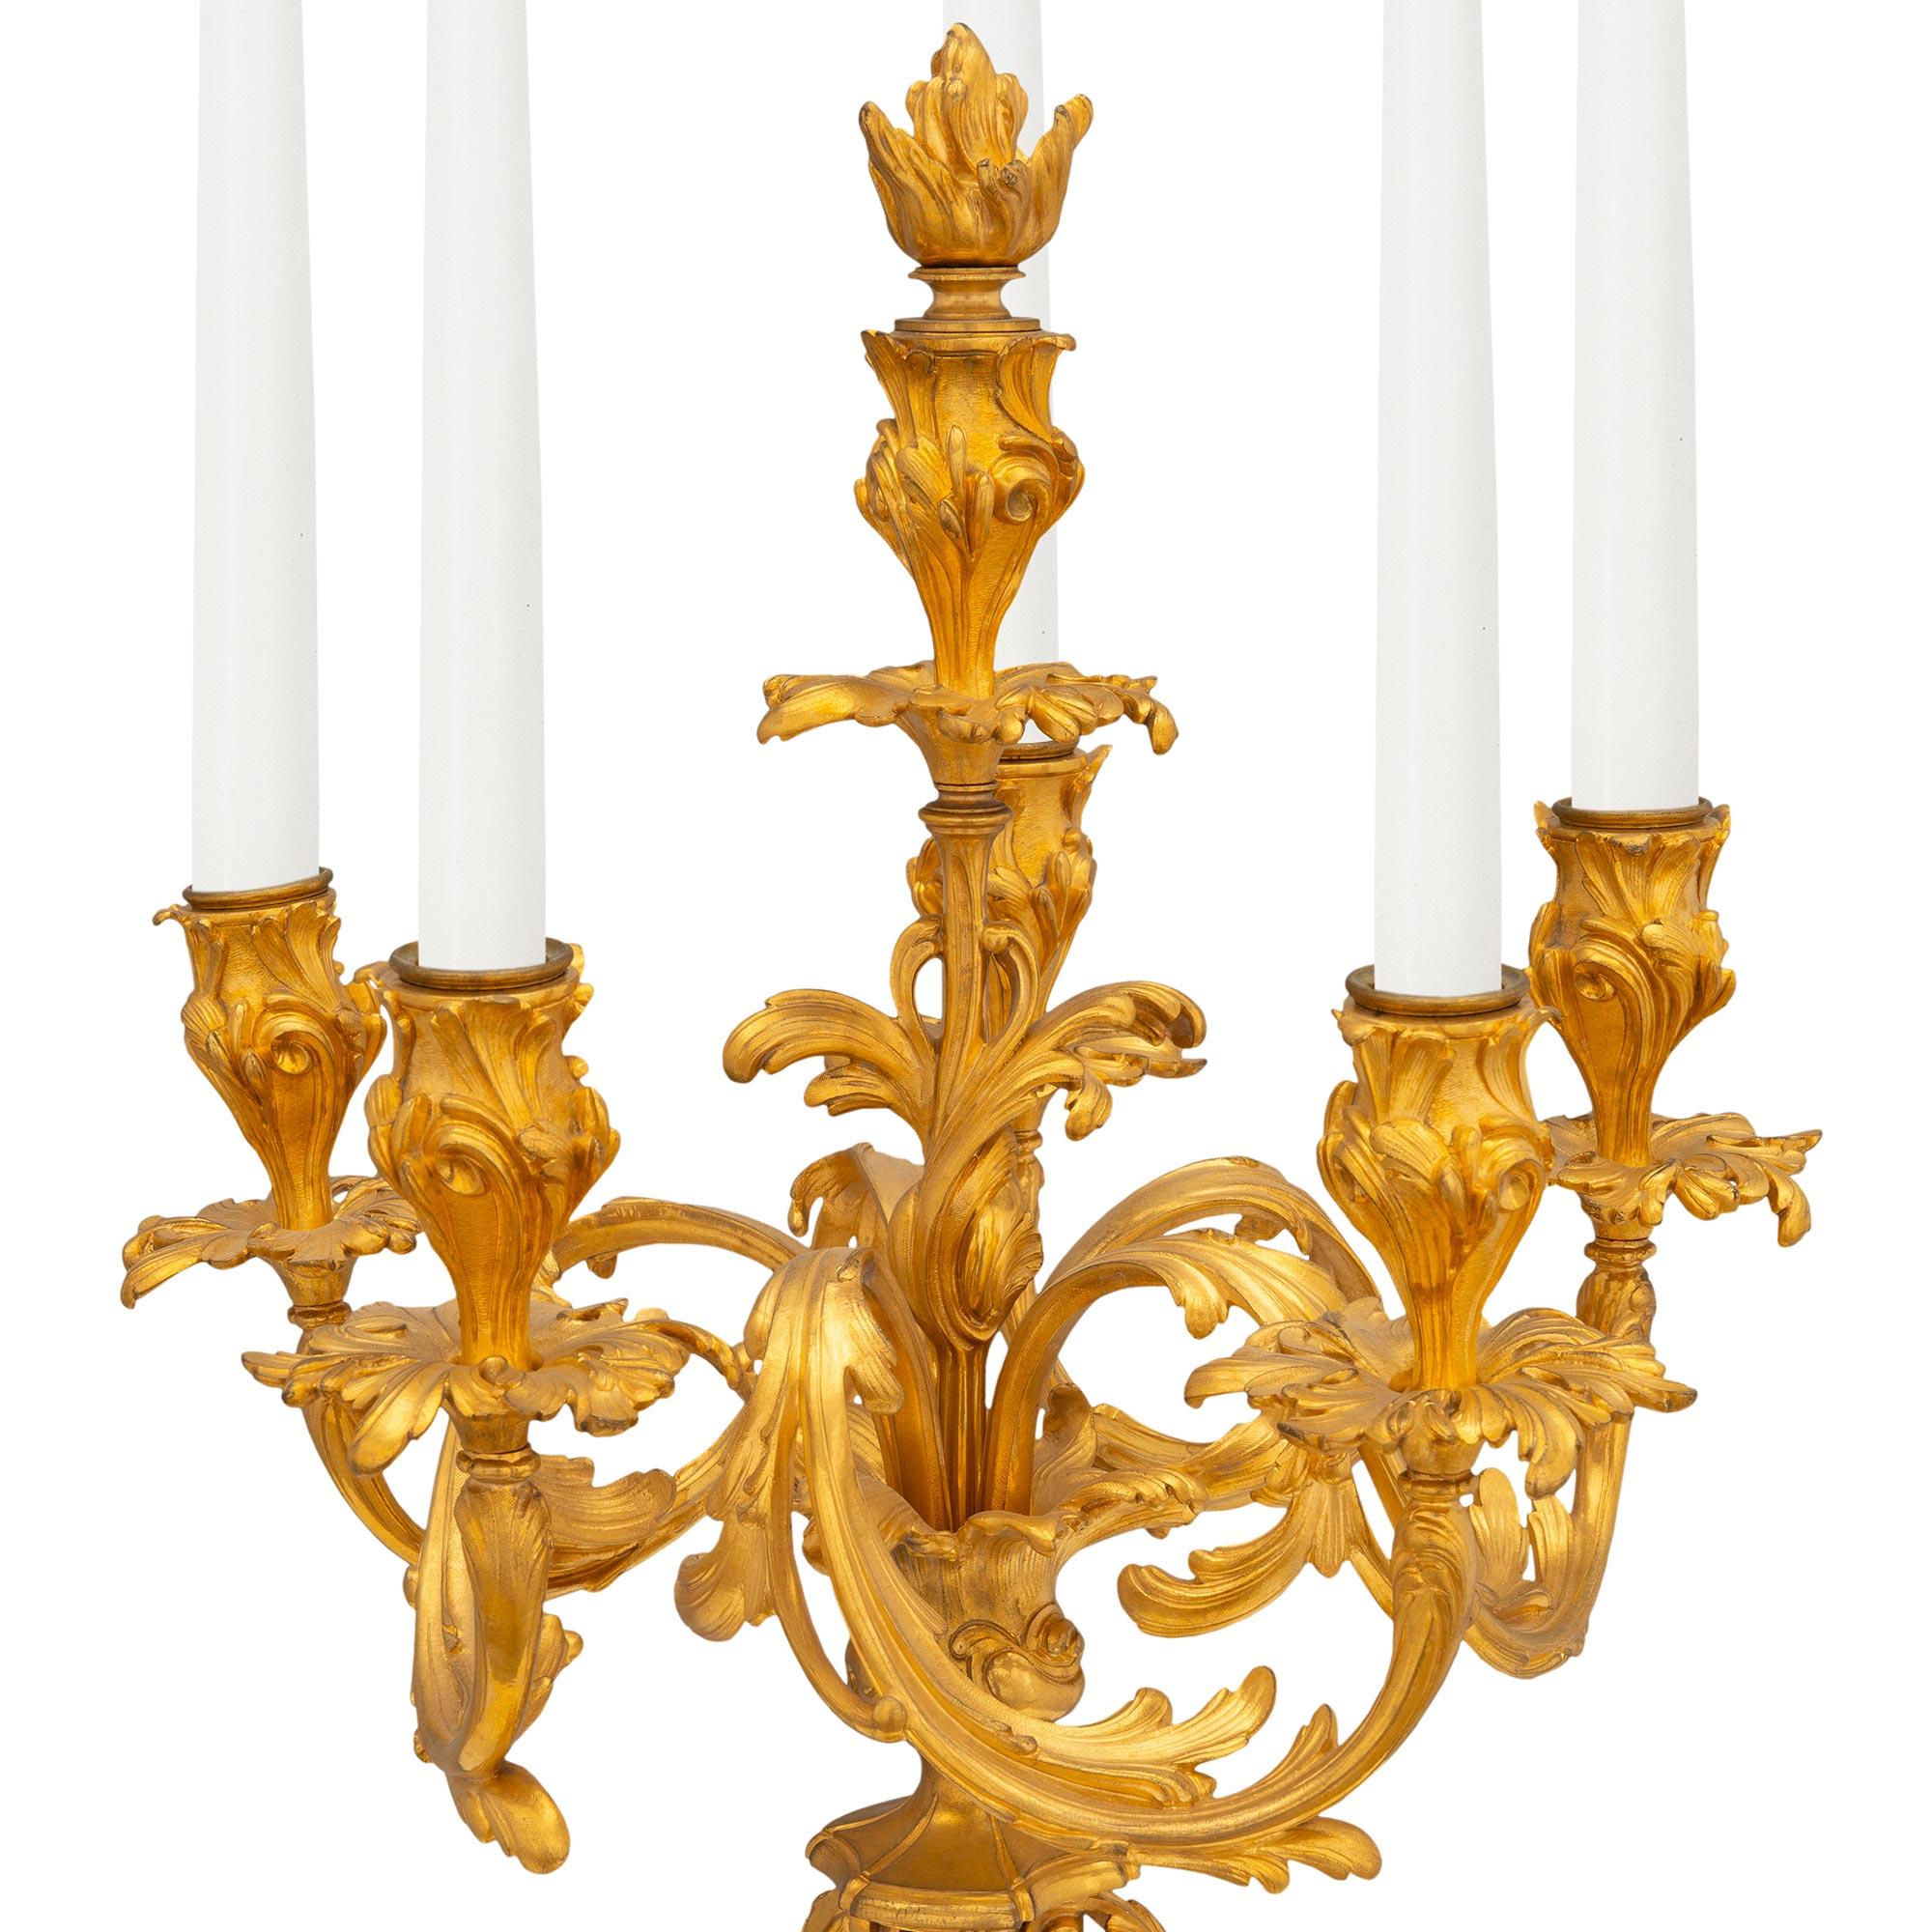 Pair of French Mid-19th Century Louis XV Style Five-Light Ormolu Candelabras For Sale 1